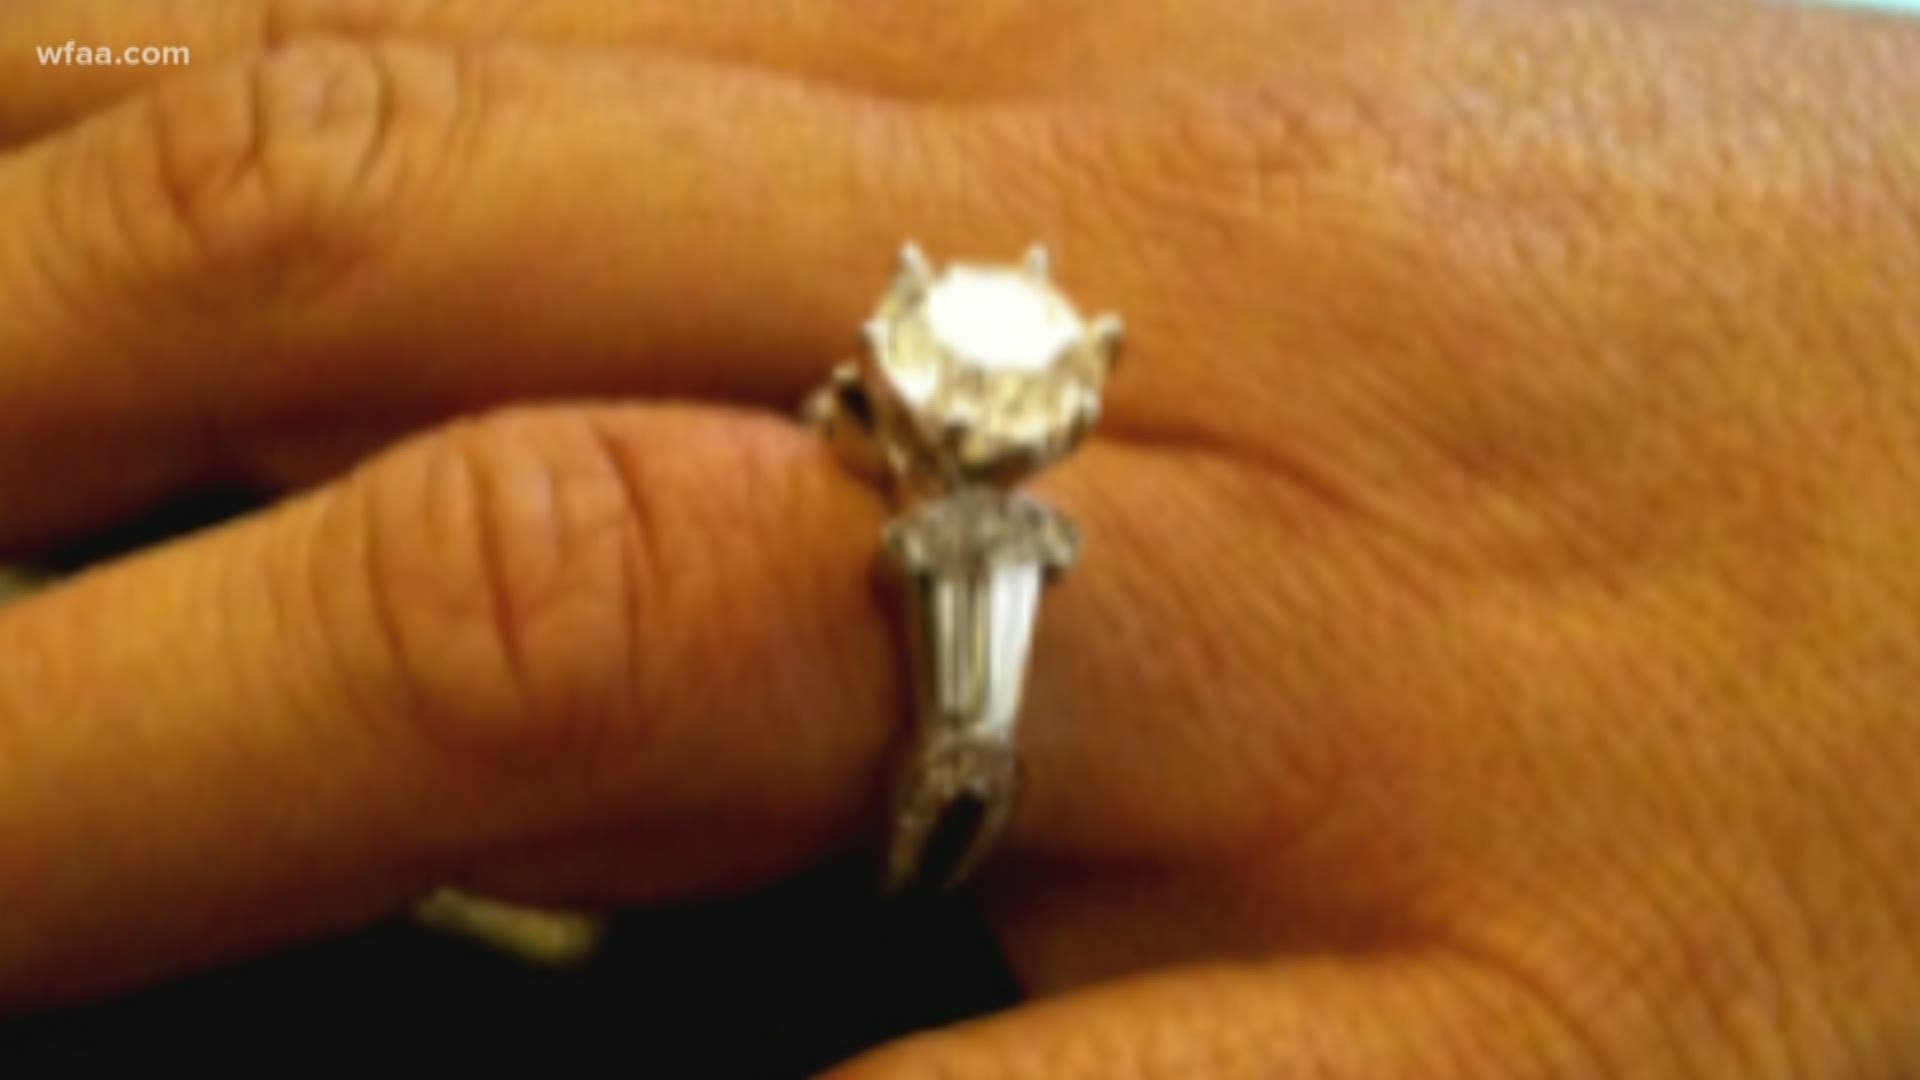 The family is offering a $1,000 reward to anyone who can return a treasured piece of jewelry.